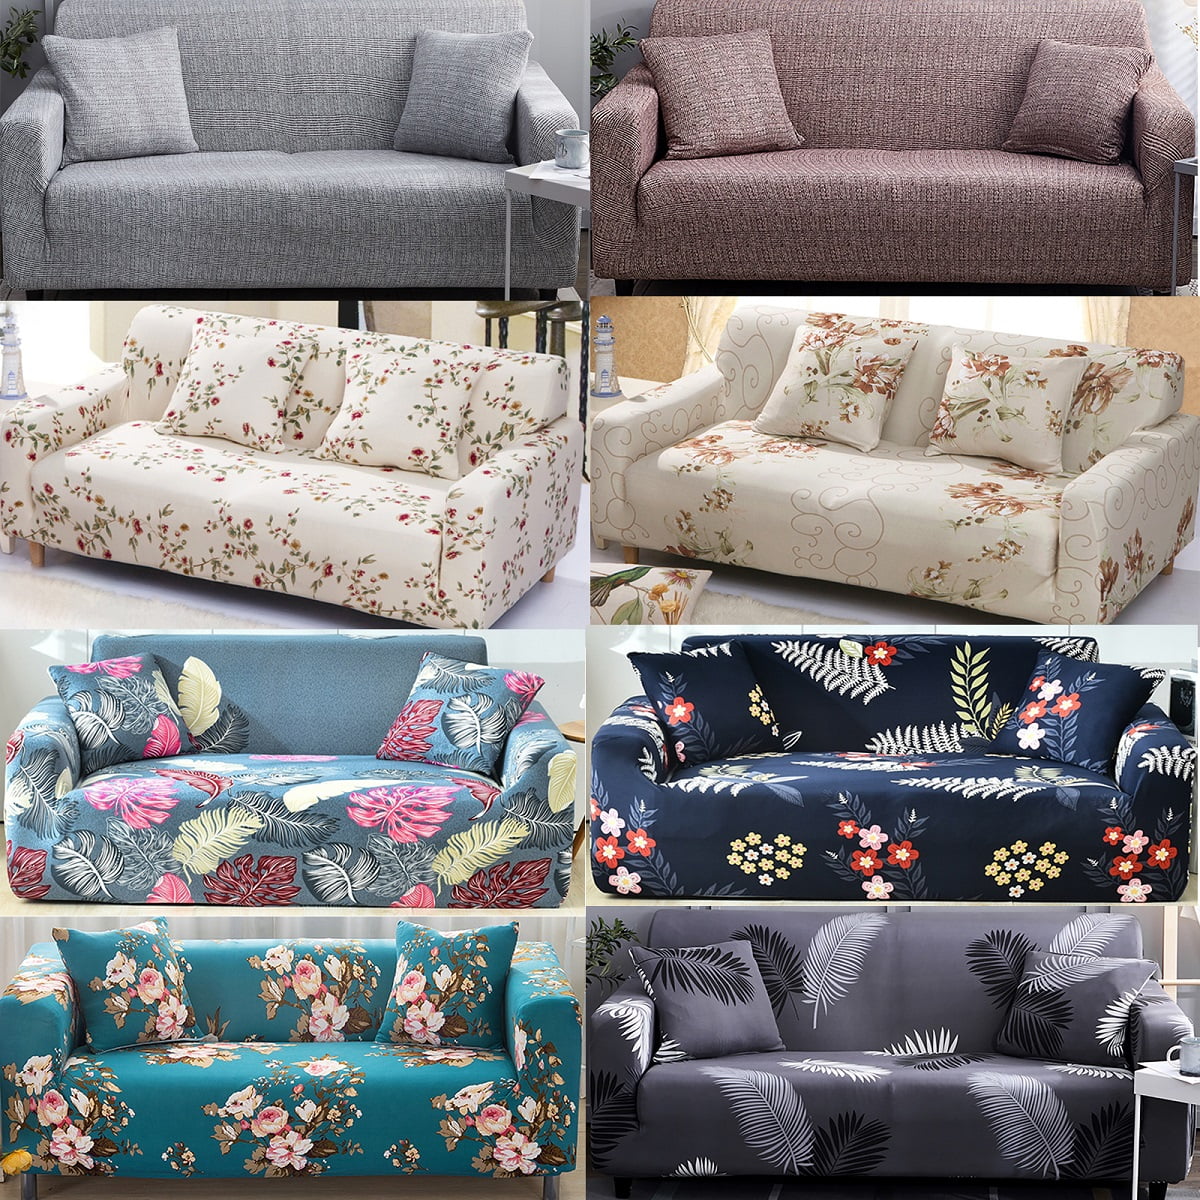 1/2/3/4 Seater Sofa Cover Furniture comfortable Floral Elastic Stretch Couch NEW